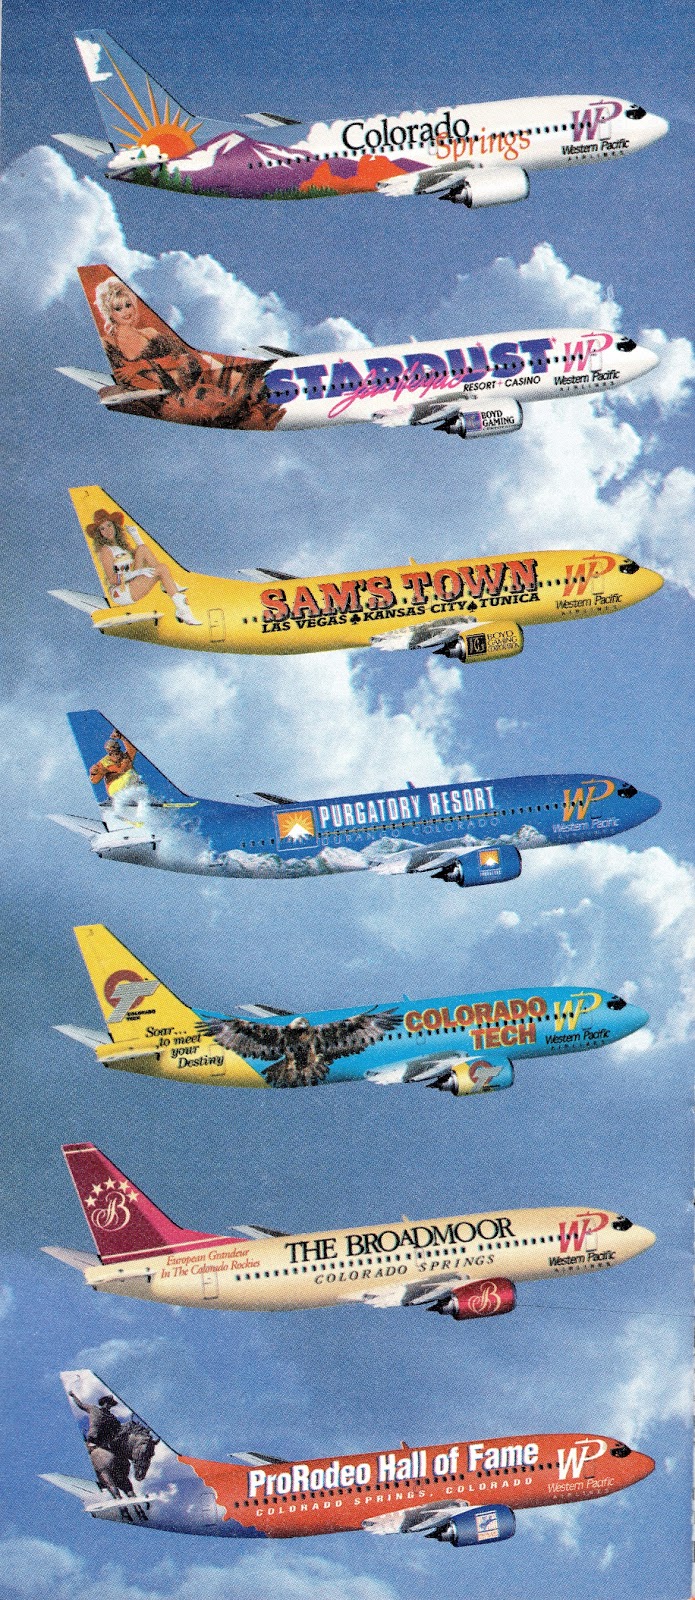 Buy 4 Western Pacific Airlines system timetable 6//29//97 save 50/% 5112